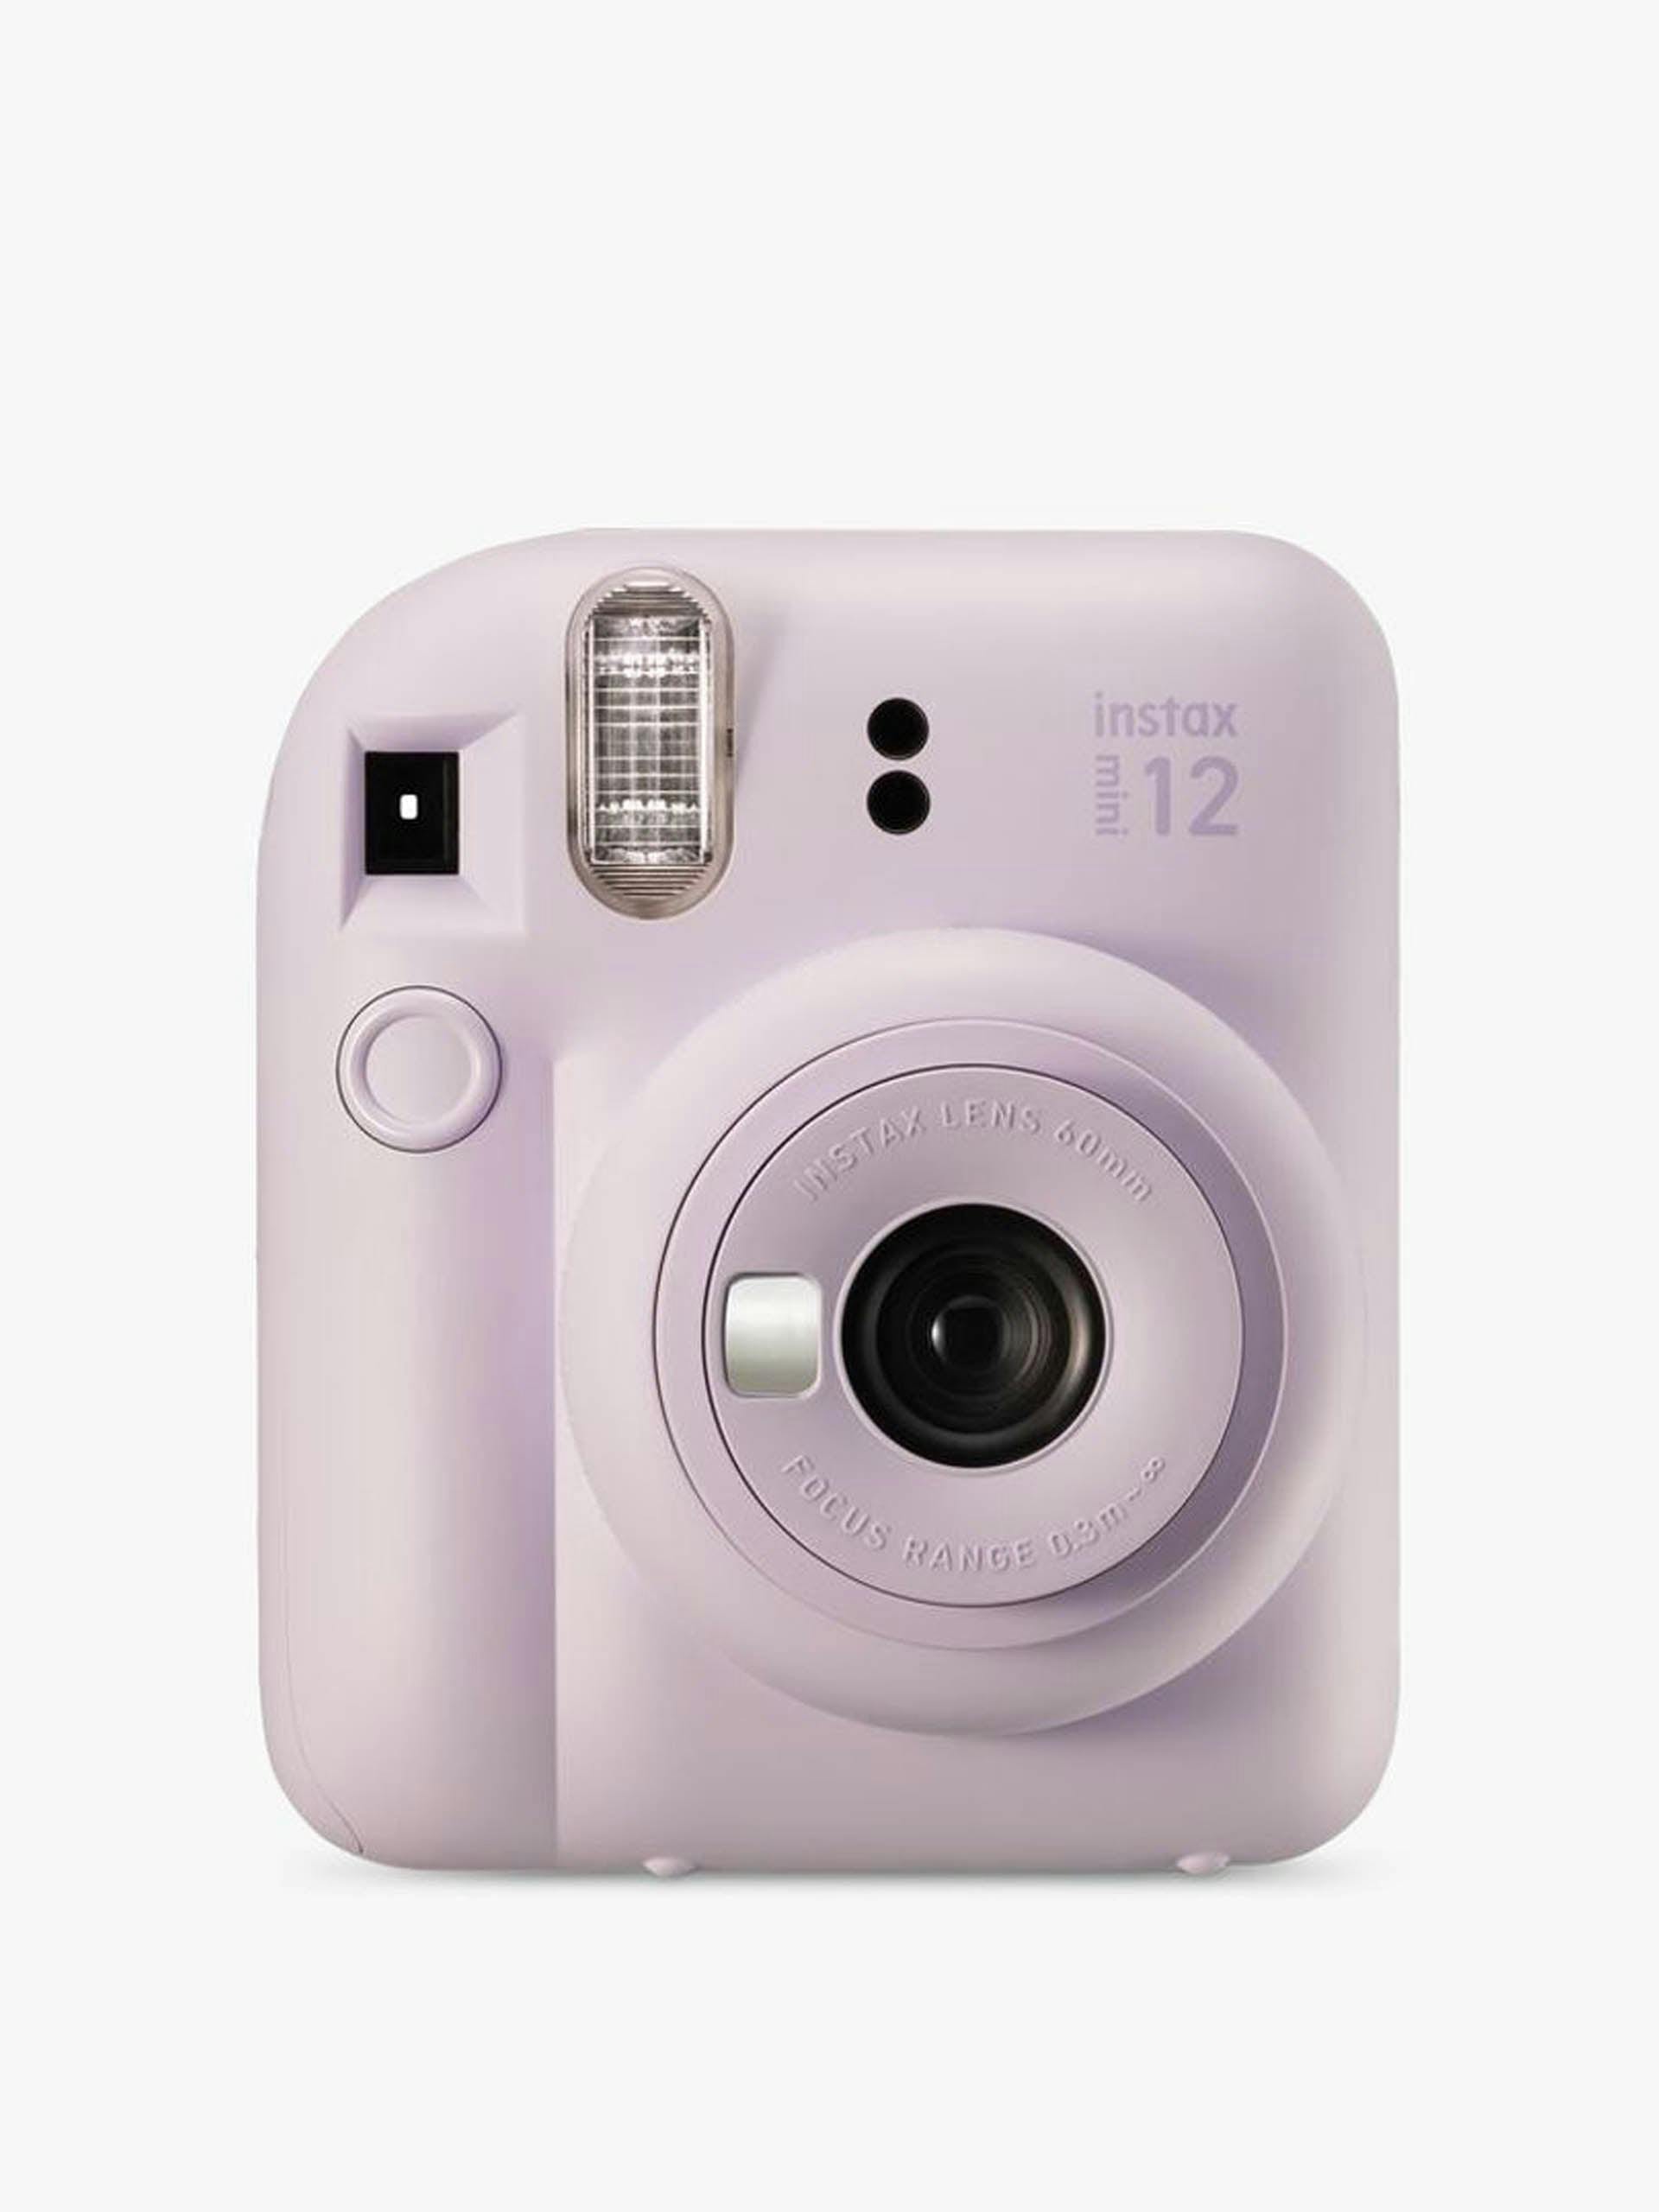 Mini 12 instant camera with built-in flash & hand strap